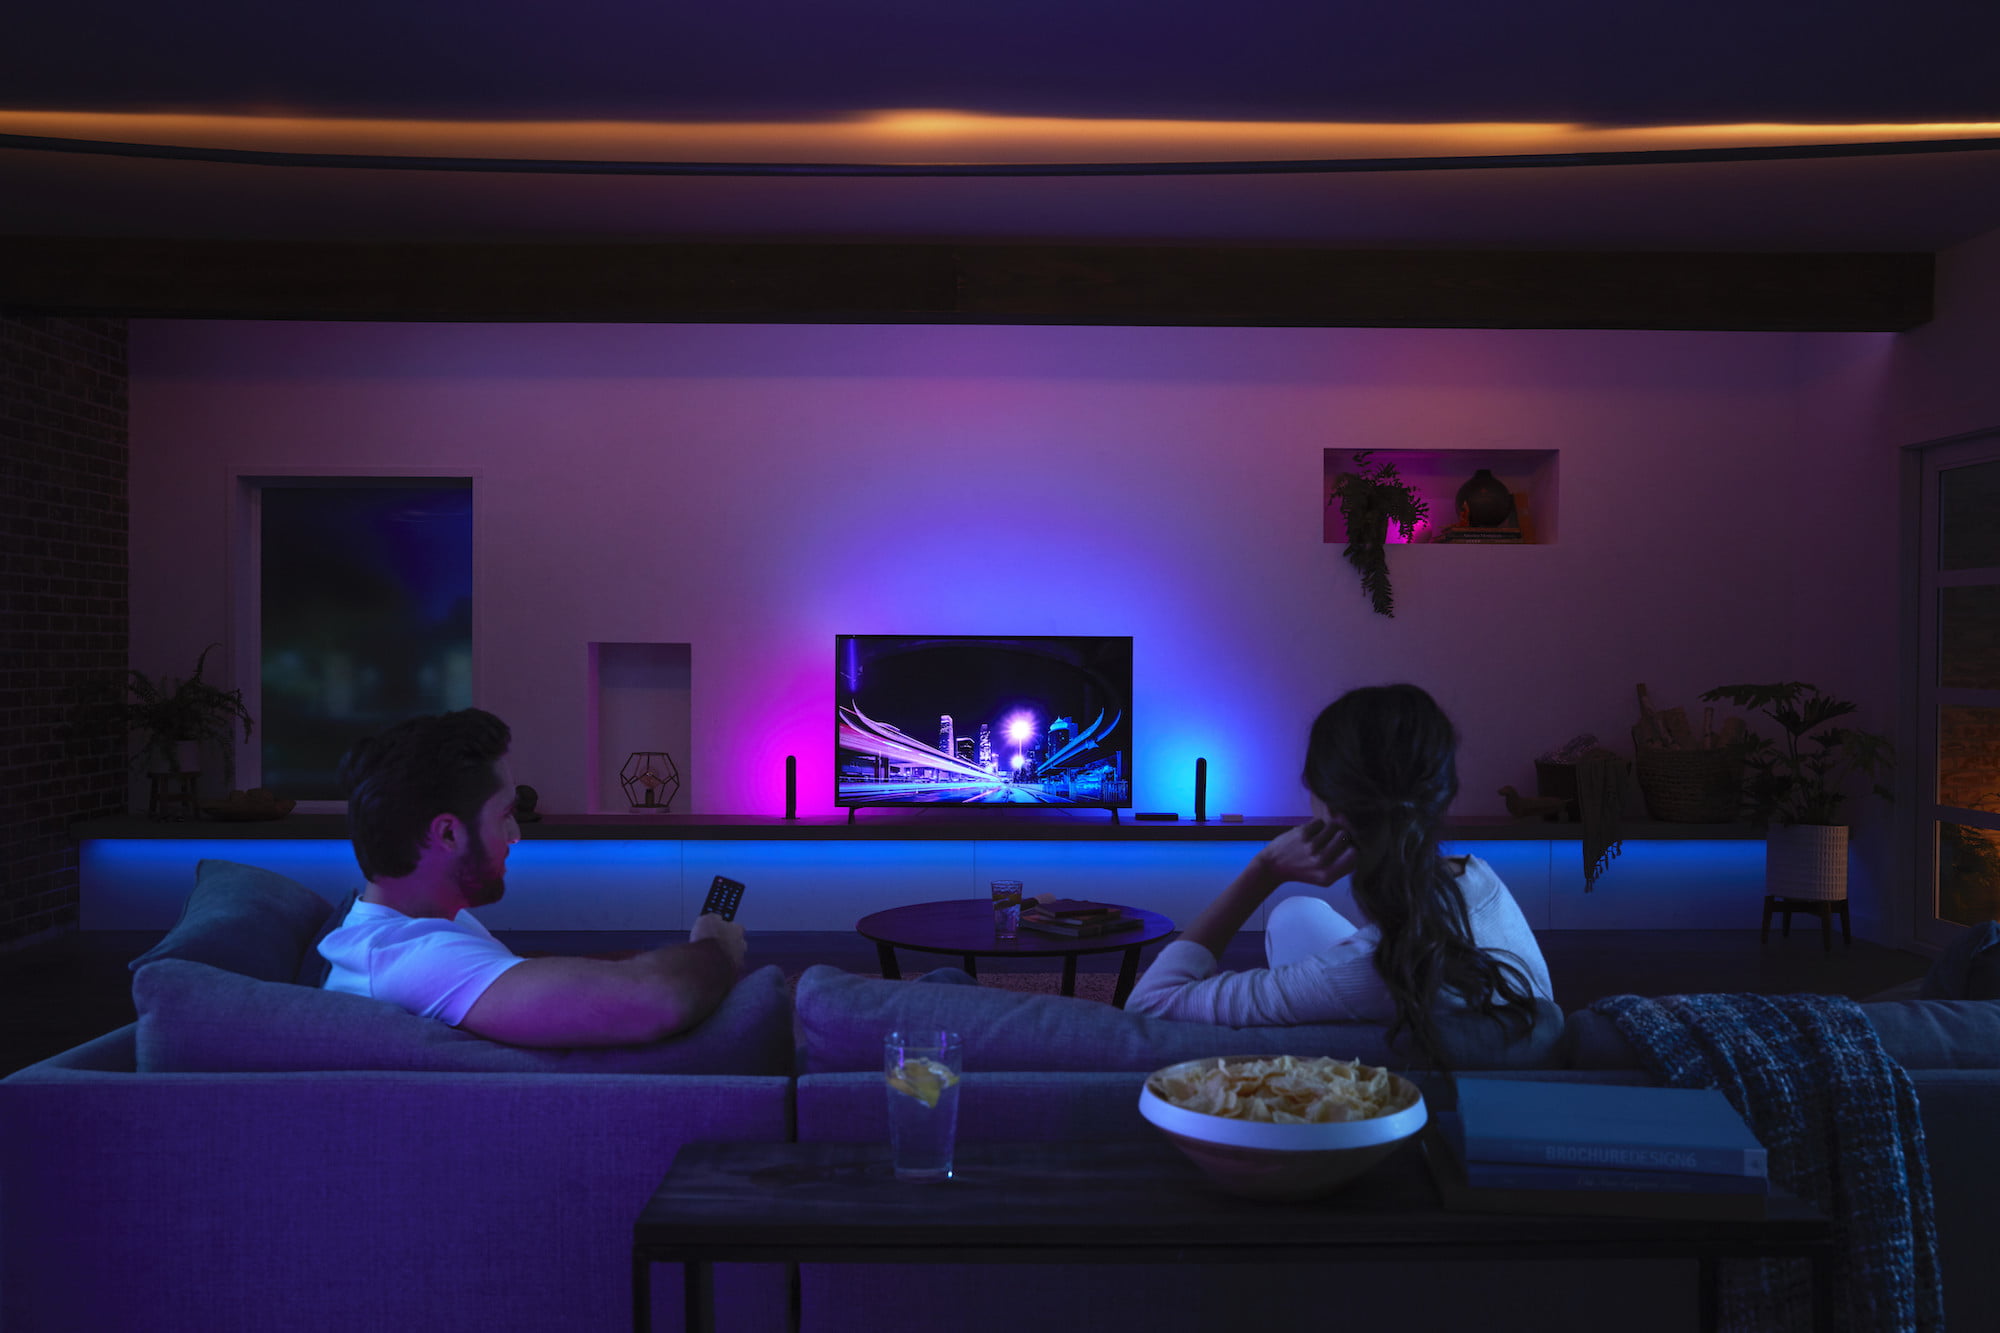 How to improve lighting in your media, TV room or home theatre